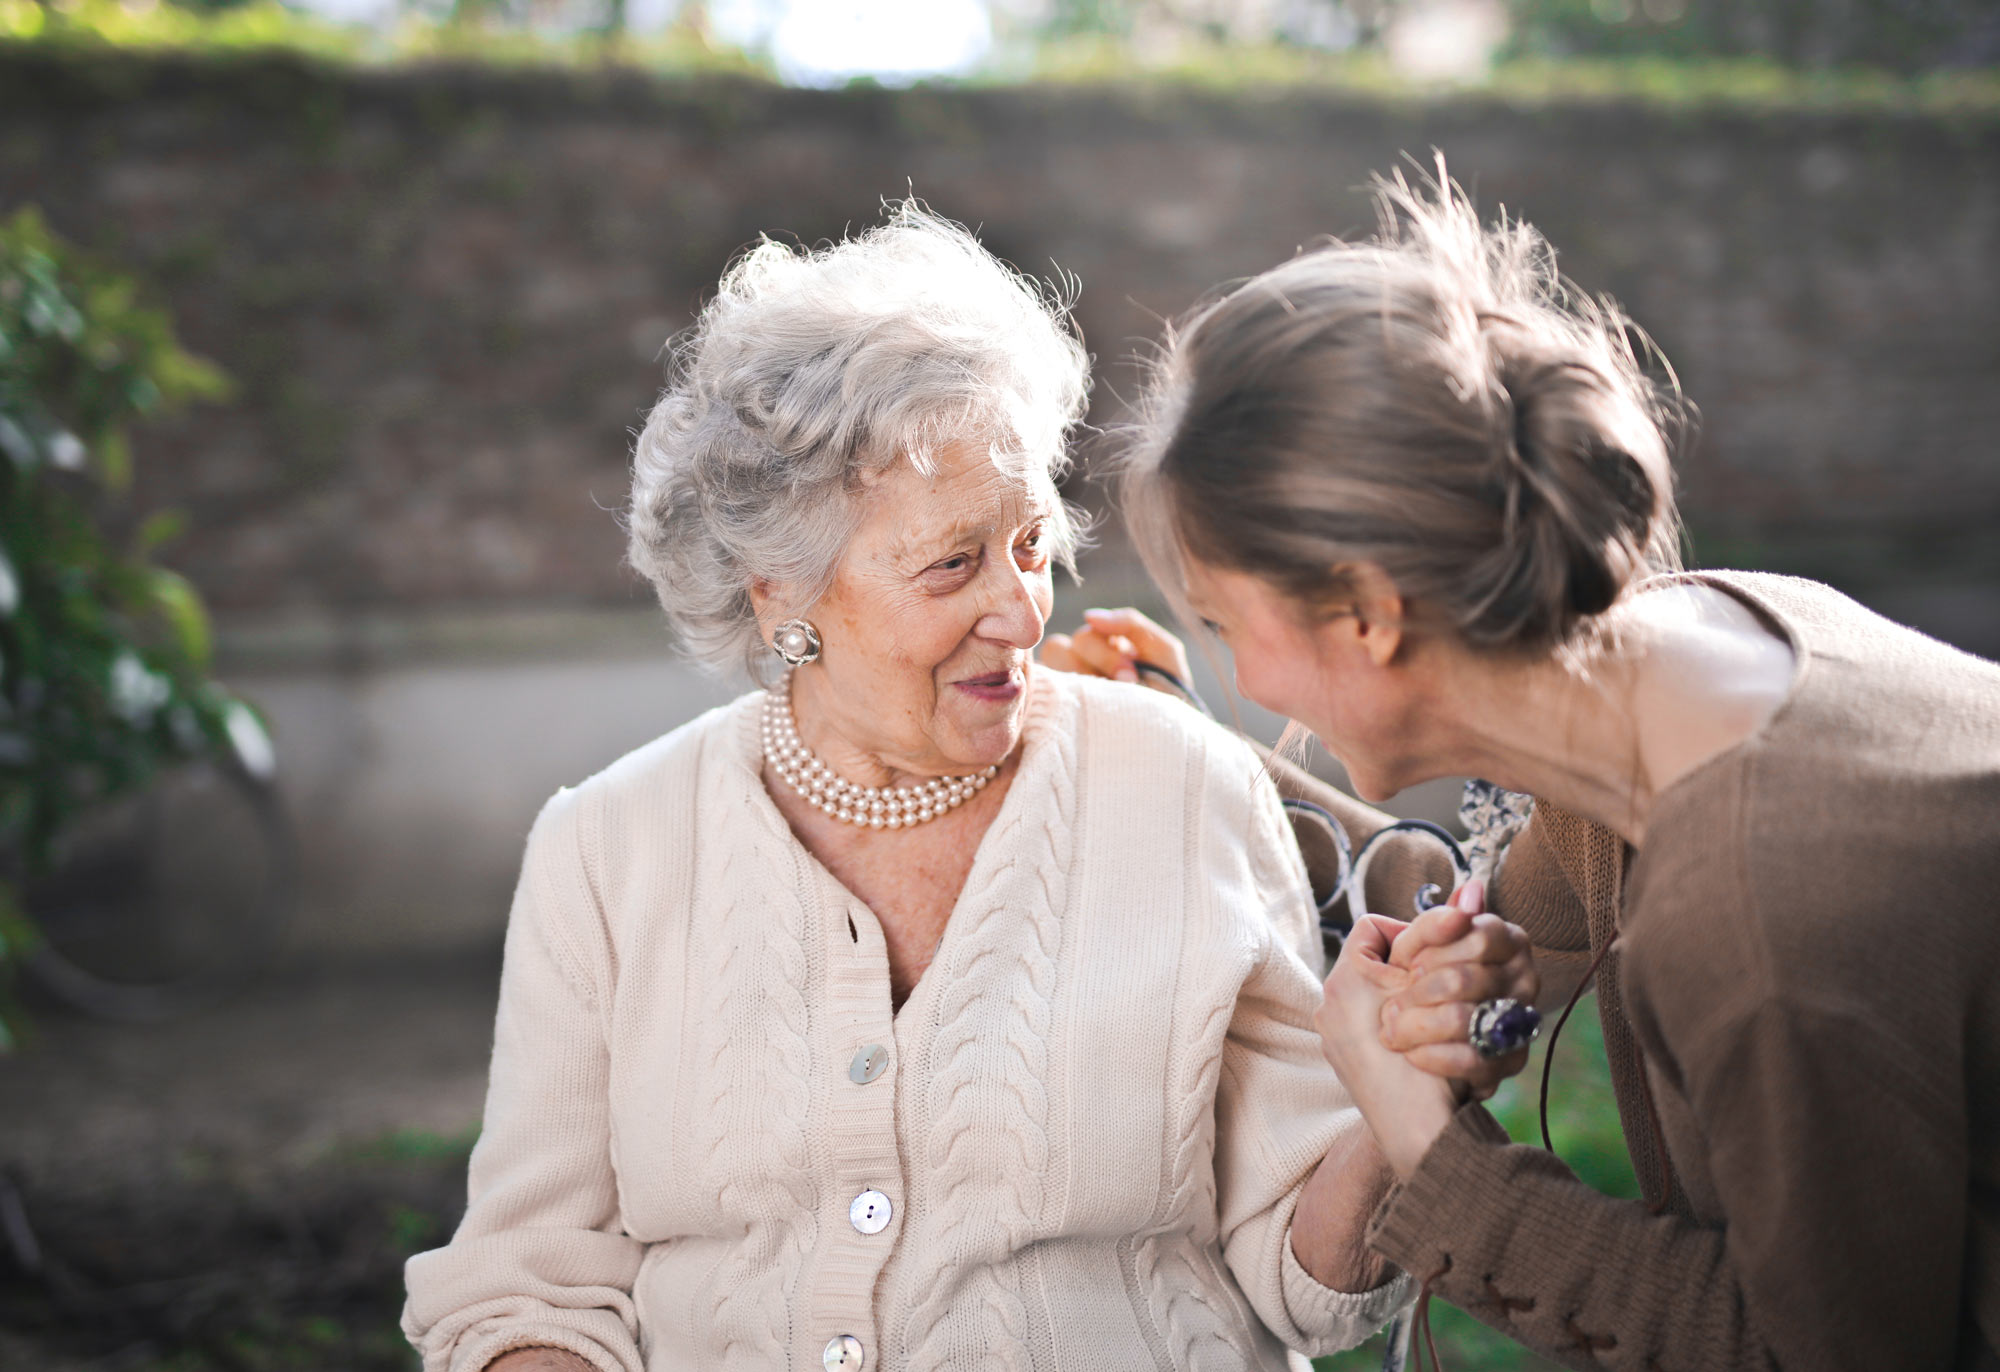 Elderly woman holding hands with younger woman